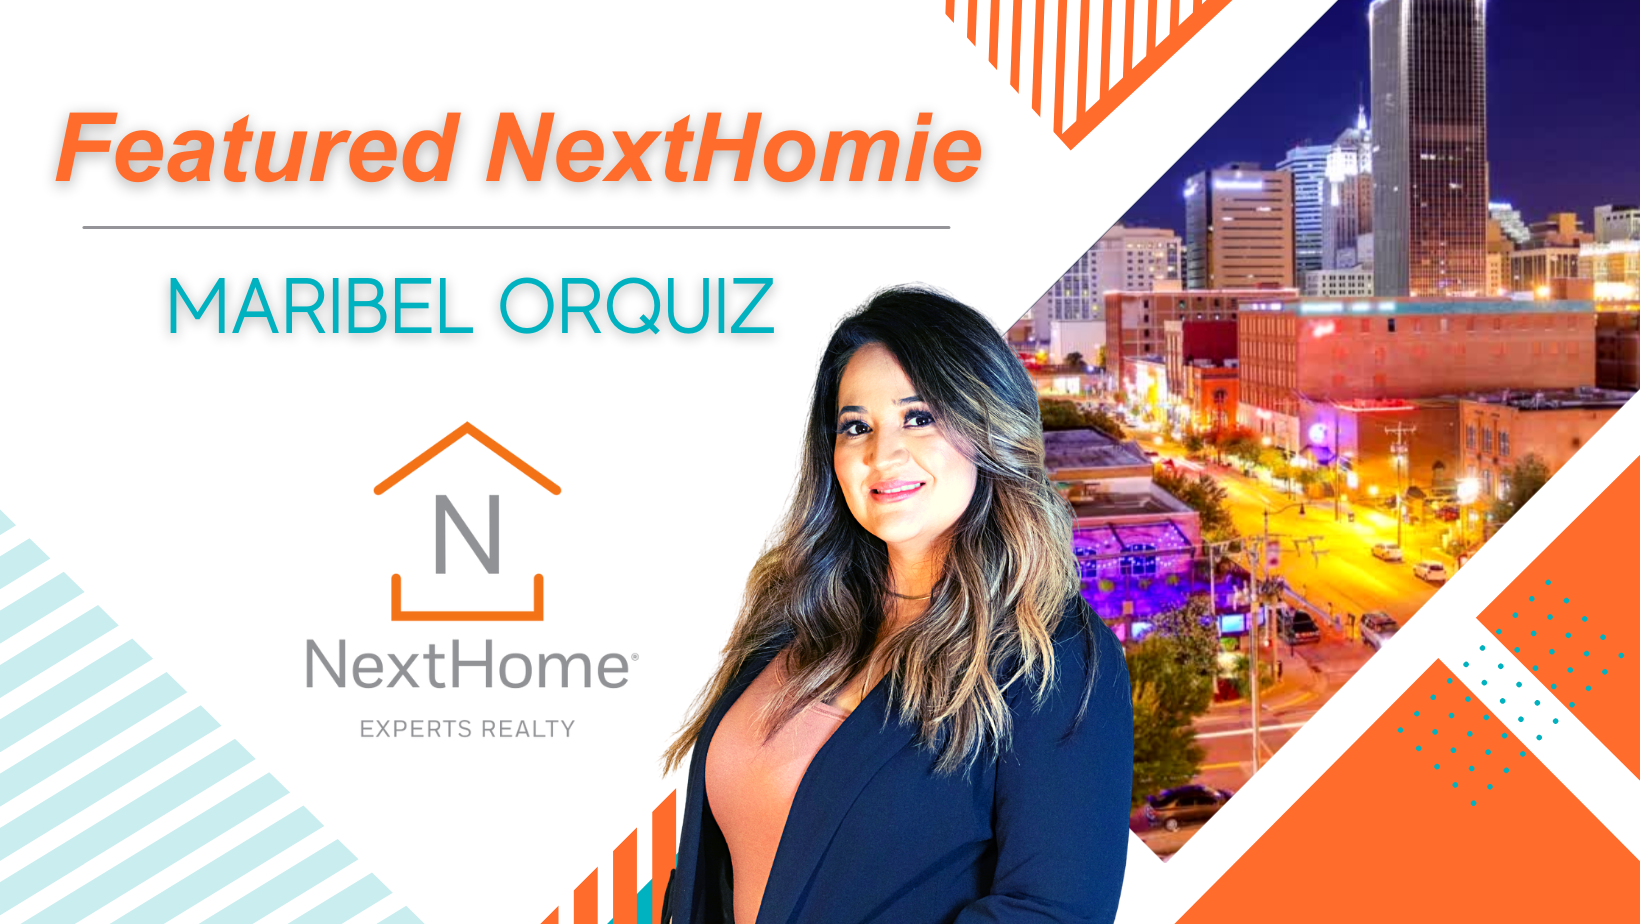 Maribel Orquiz Shares Details on her Big Move to NextHome Experts Realty in 2022